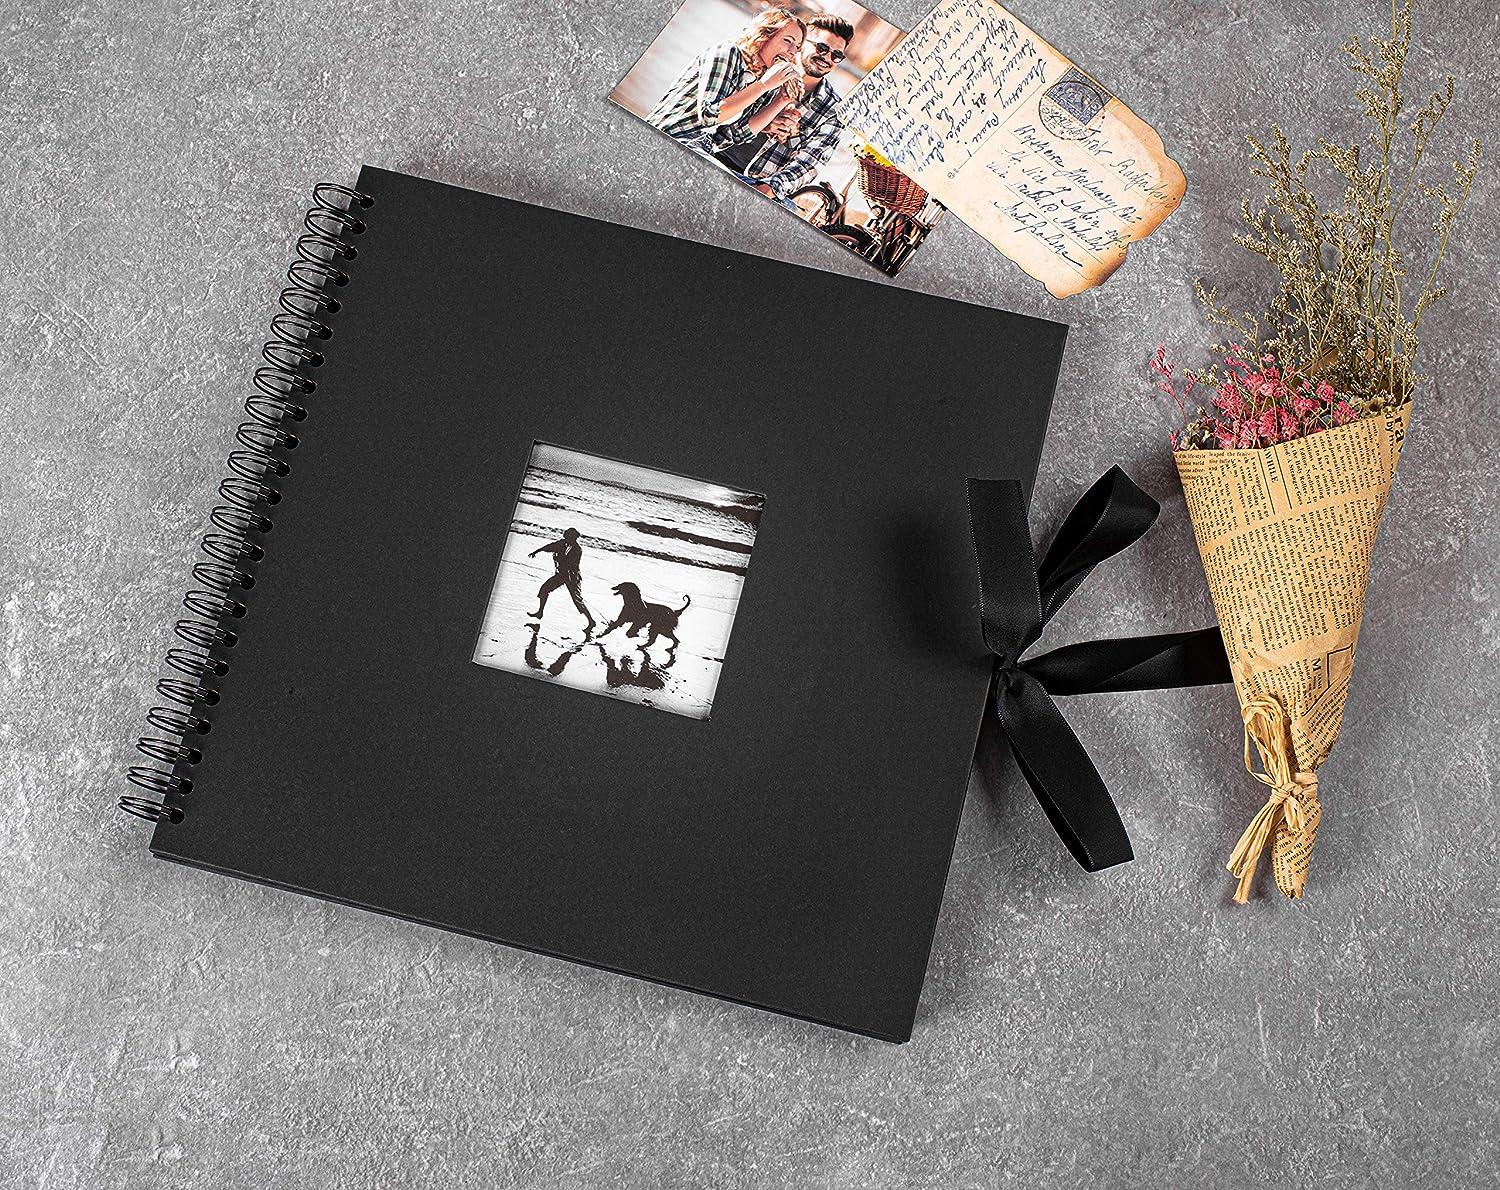 12x12 inch Our Adventure Book Scrapbook Photo Album, Wedding Guestbook, 60  pages